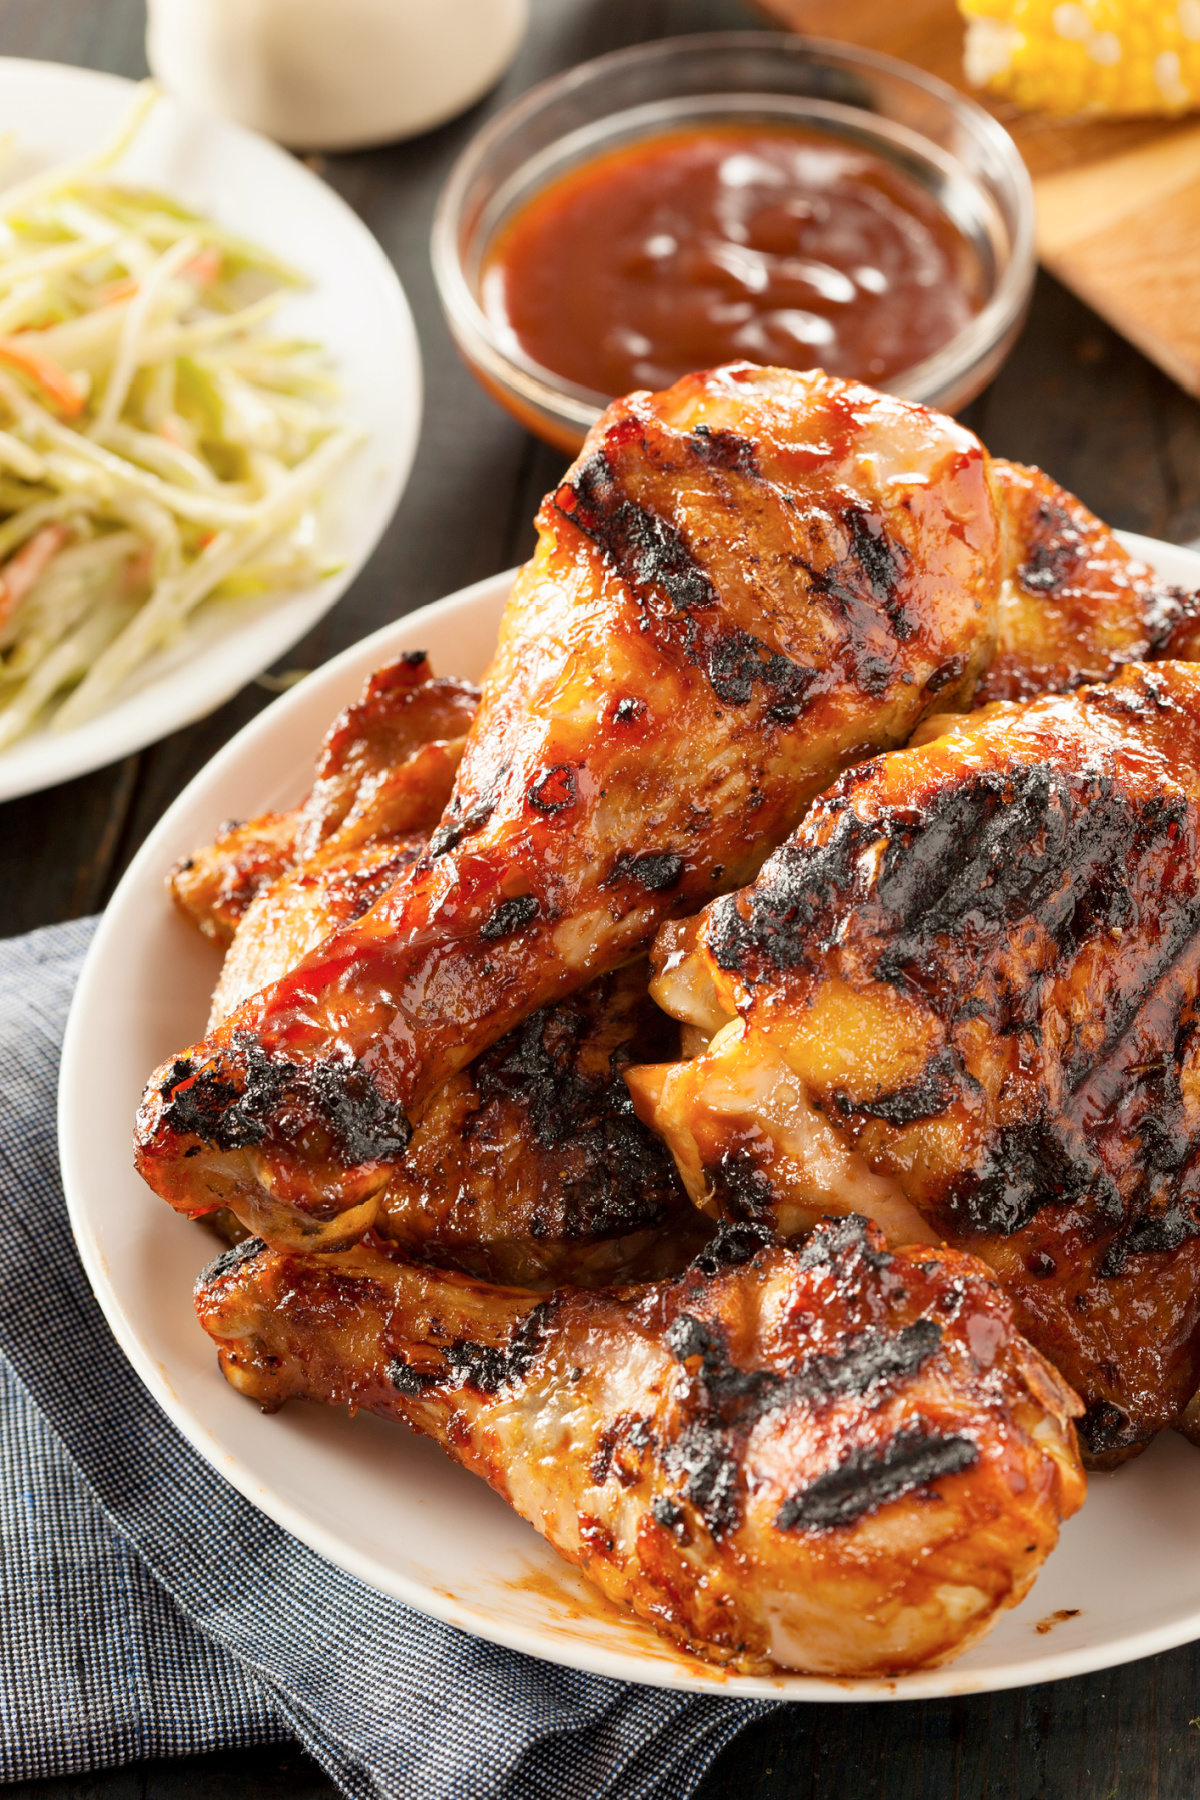 Kansas City BBQ Chicken recipe - is the MOST amazing recipe you will ever try!